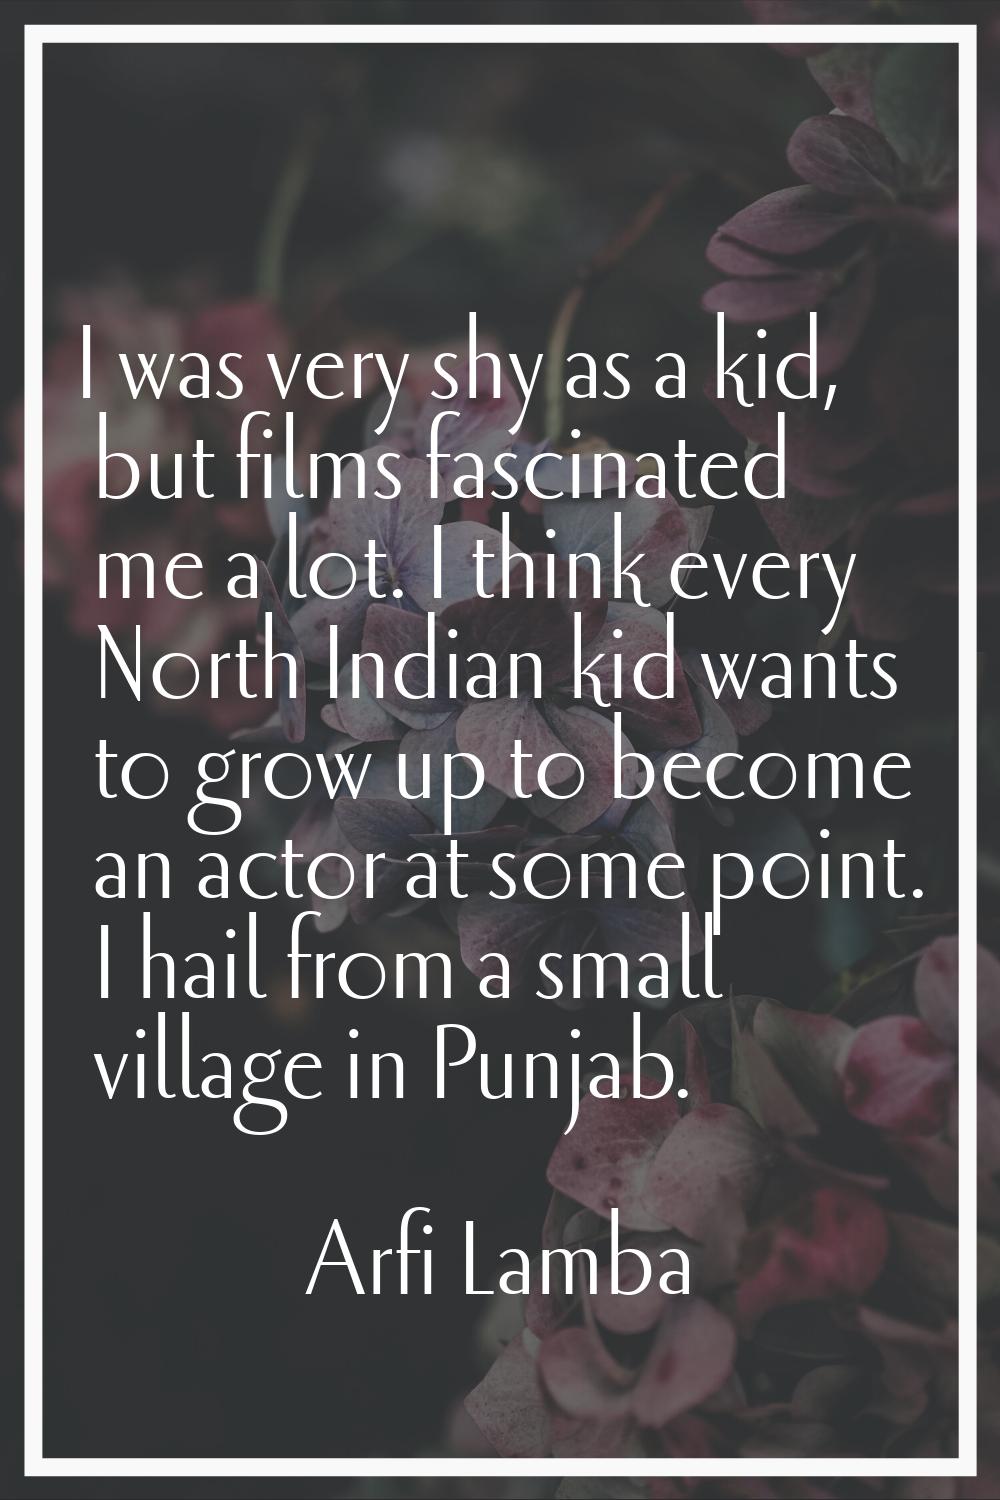 I was very shy as a kid, but films fascinated me a lot. I think every North Indian kid wants to gro